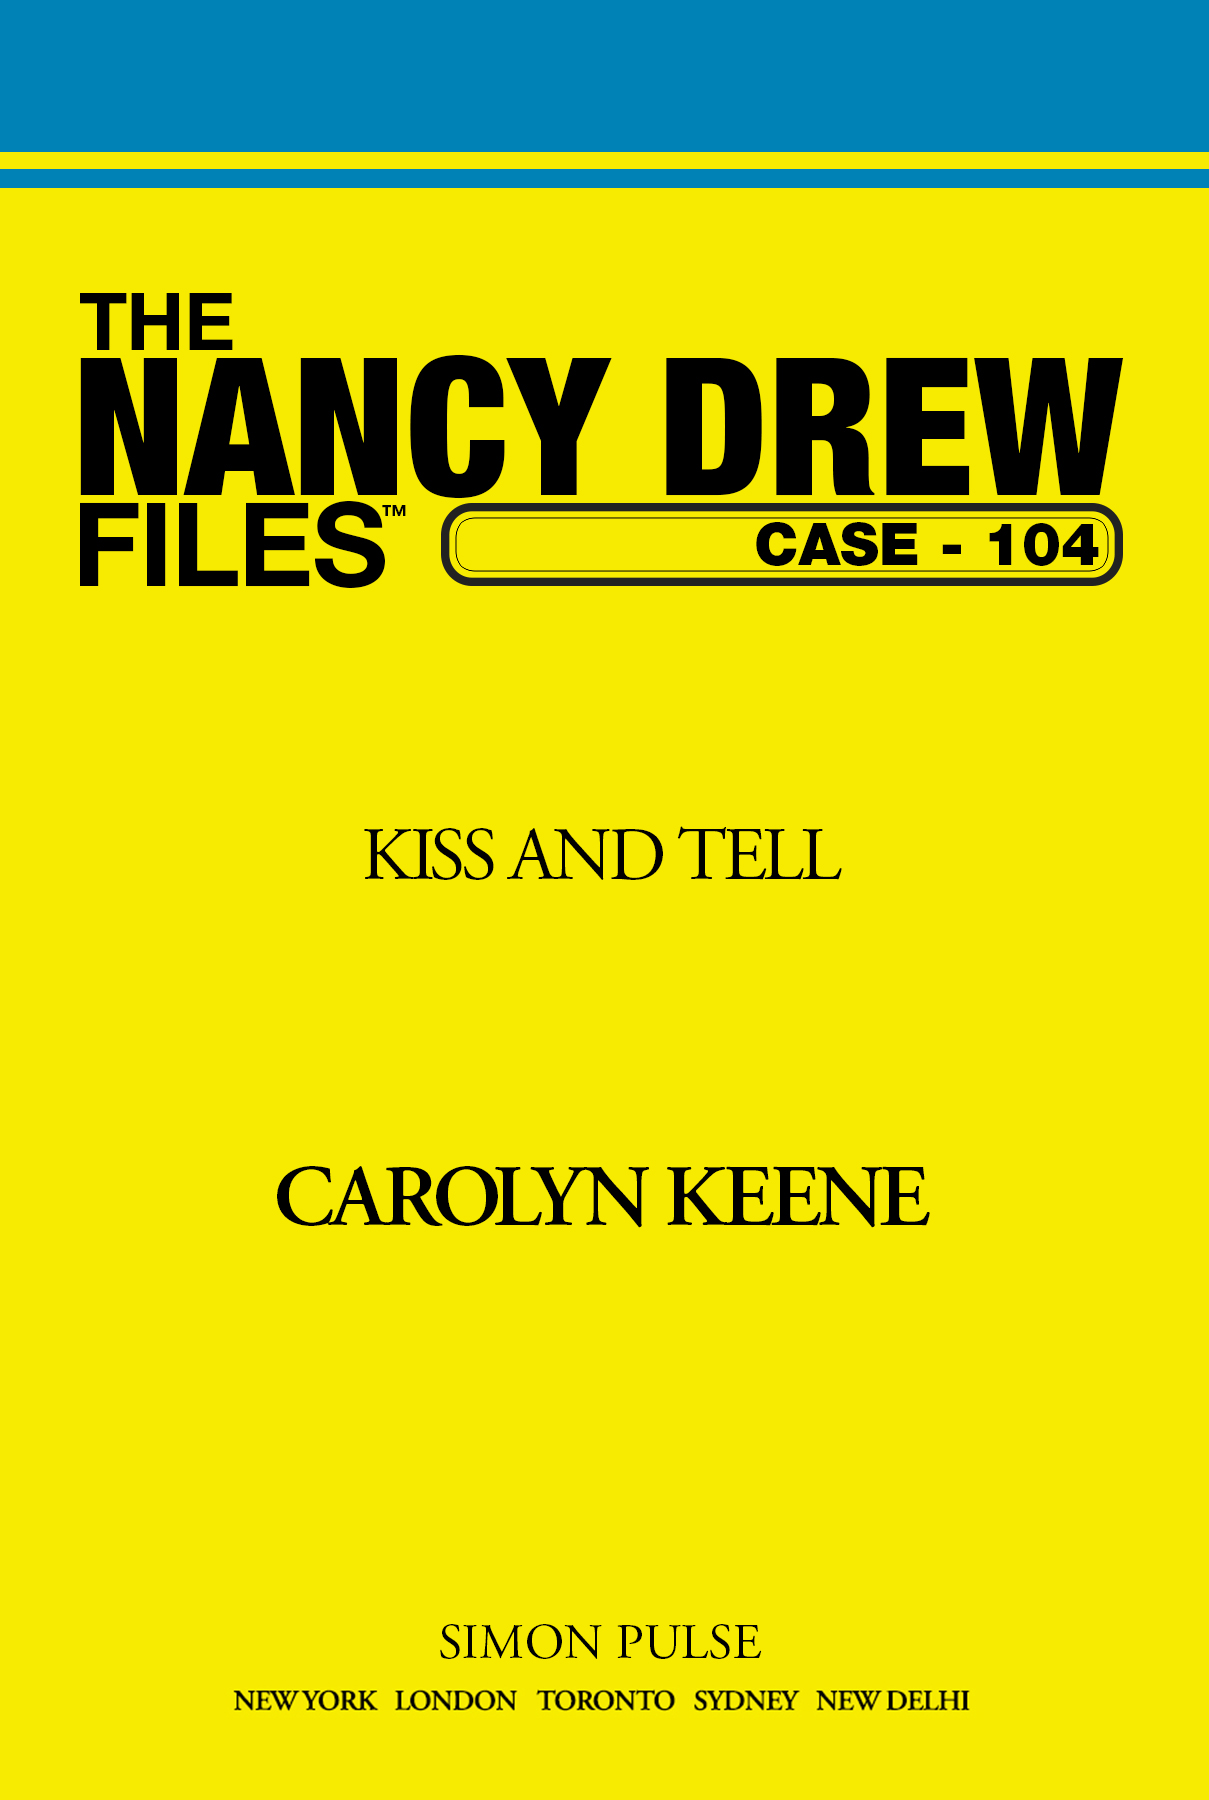 Kiss and Tell by Carolyn Keene